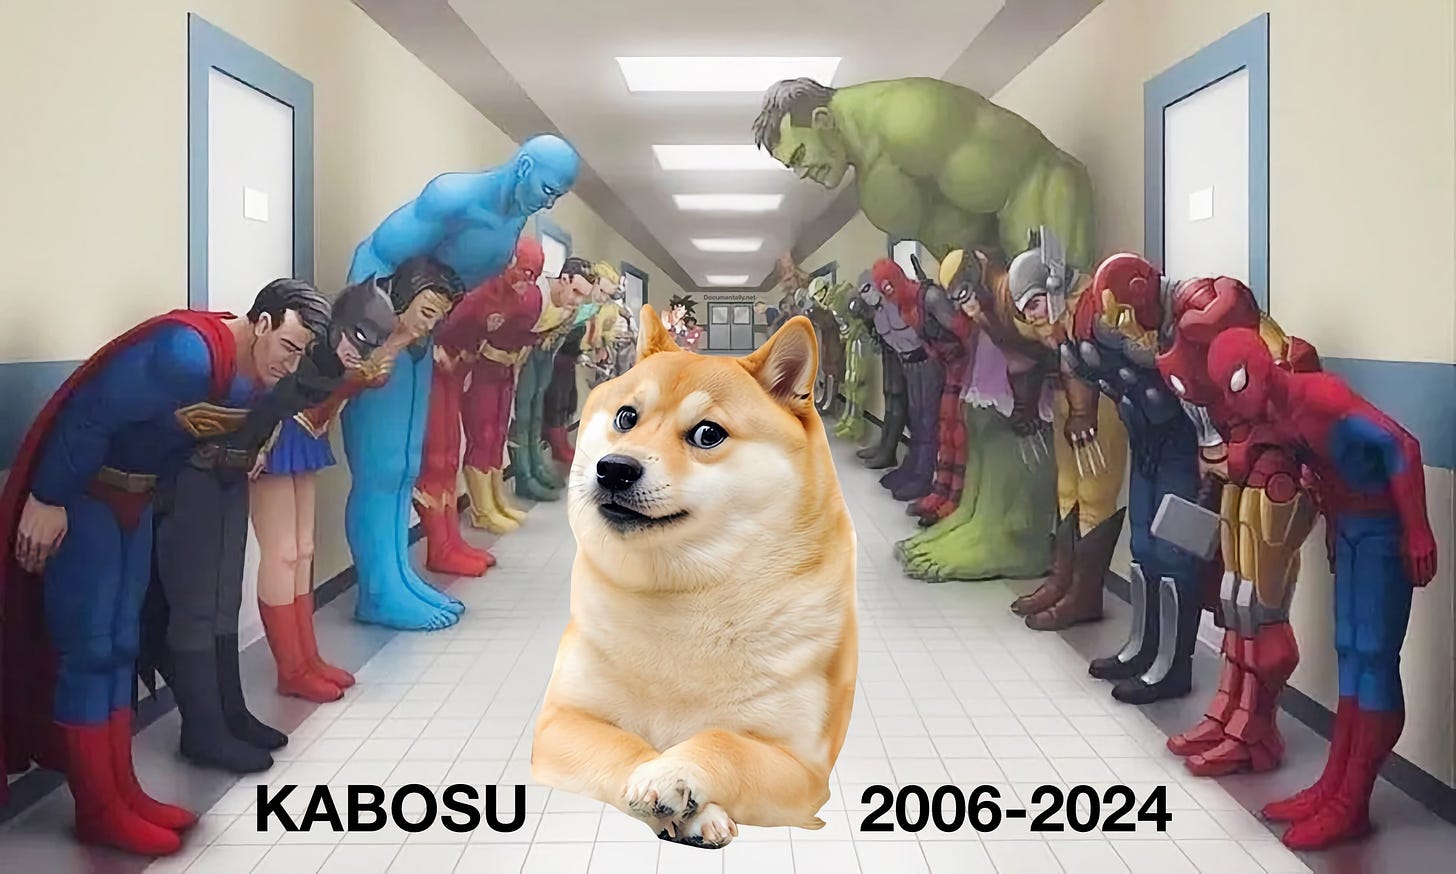 An image od superheroes bowing down to the meme dog Kabosu who died today aged about 18 years old. 2006-2024